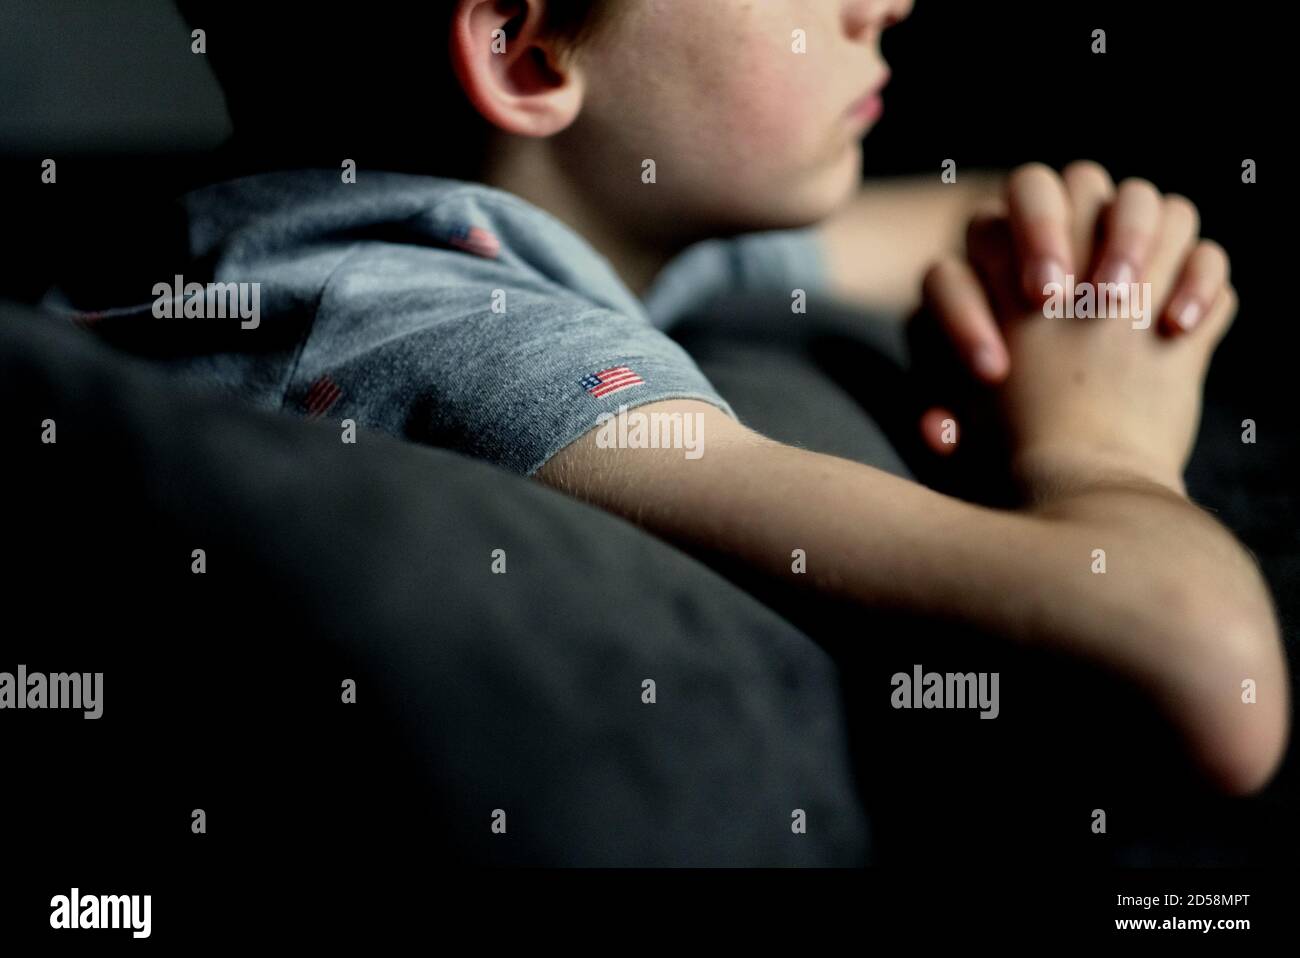 Close-up of a boy wearing an American flag t-shirt lying on his bed praying Stock Photo